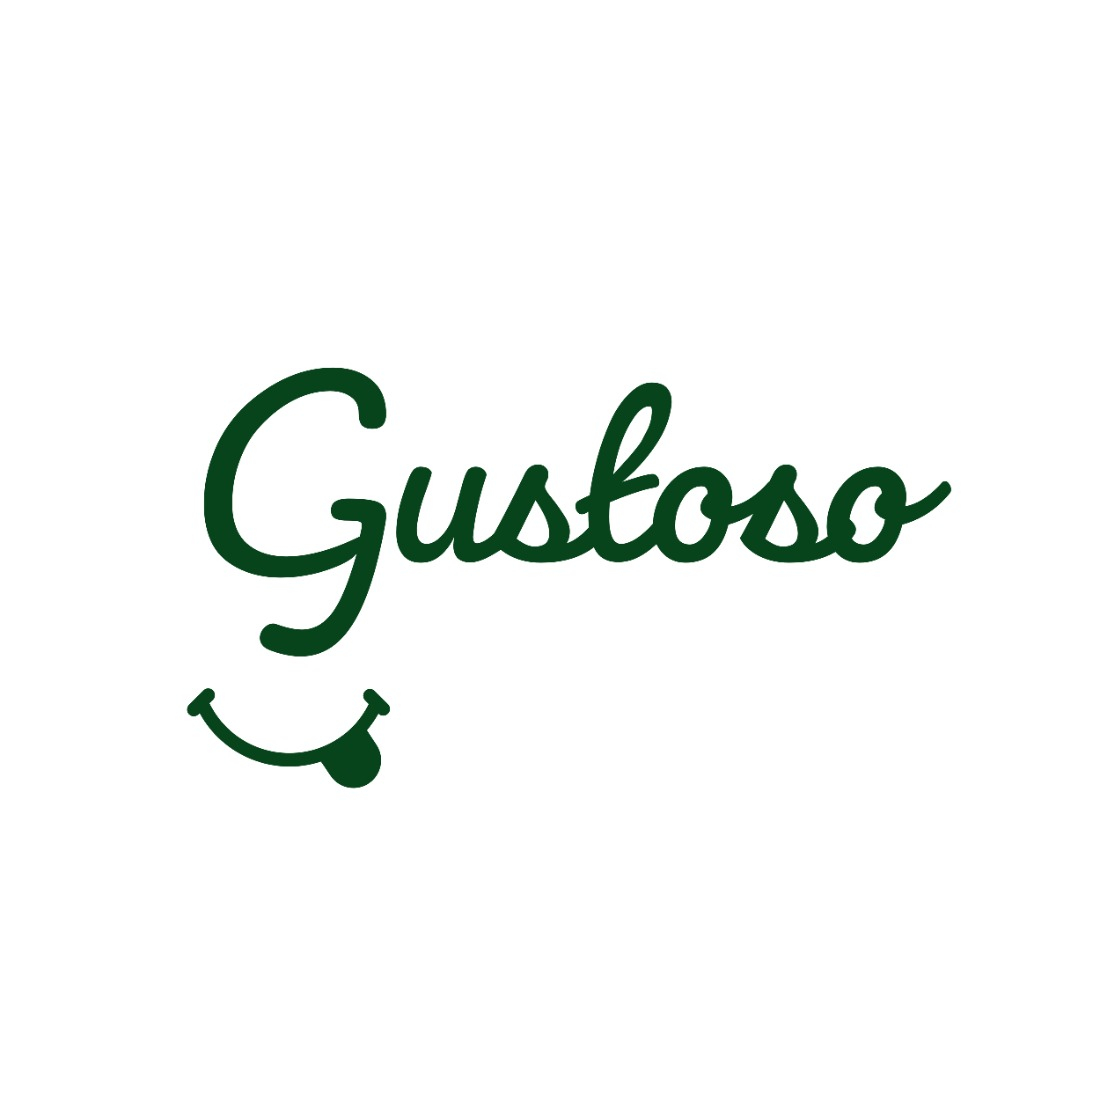 Gustoso - Restaurant Logo preview image.